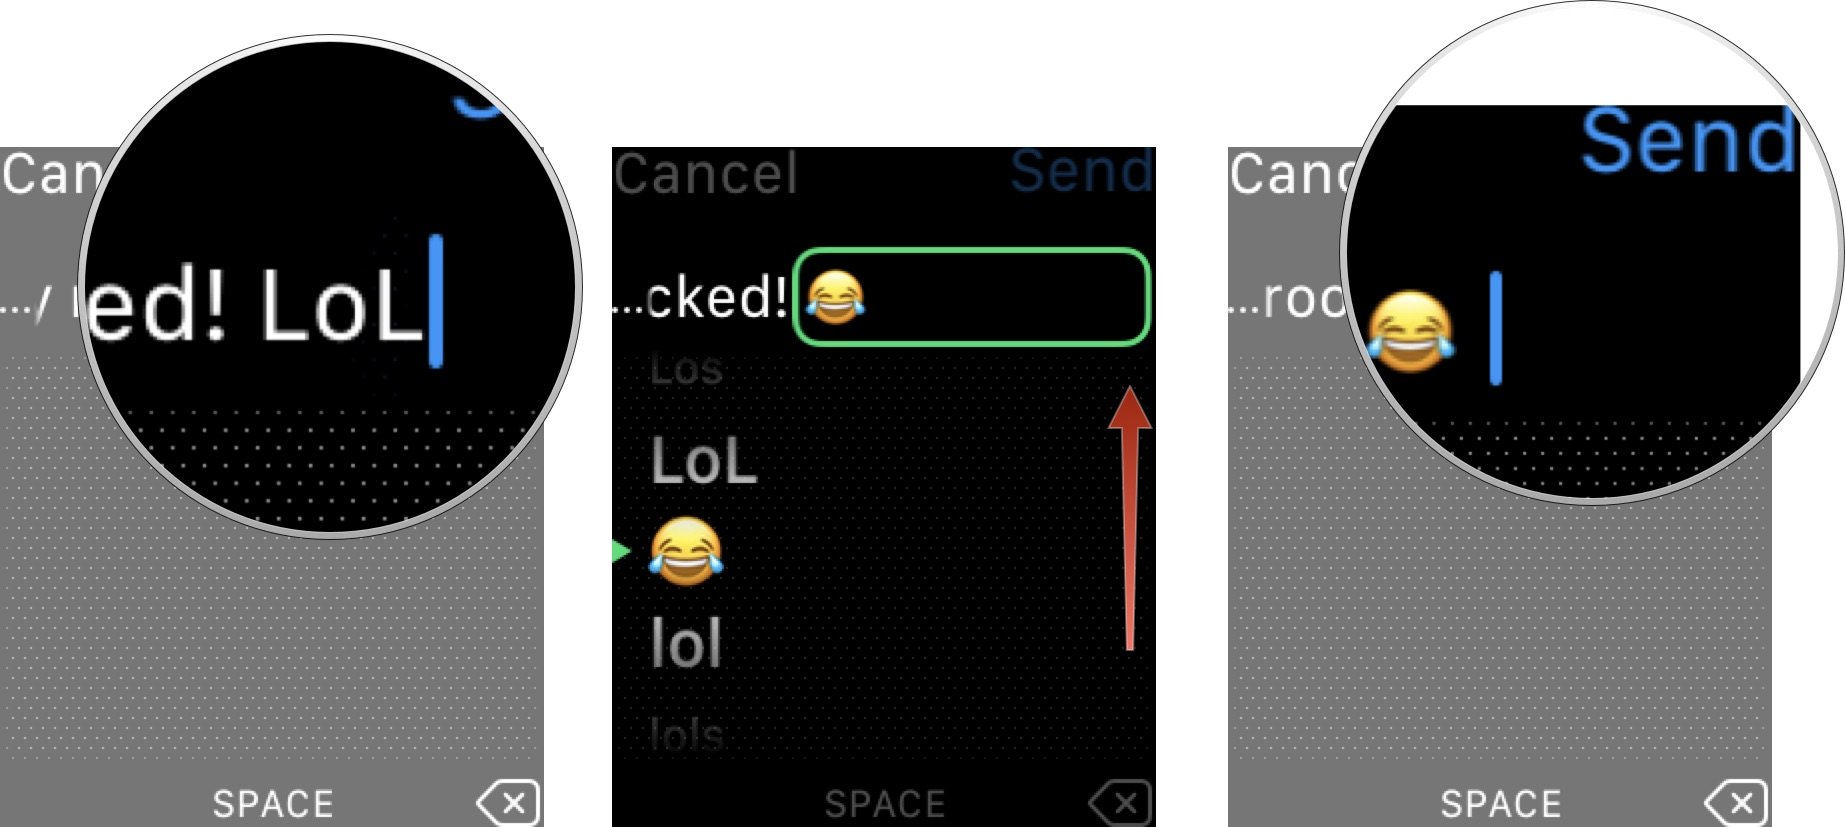 Using Scribble on Apple Watch to send an emoji showing the steps to Type an emoji word, then rotate the Digital Crown, then tap Send